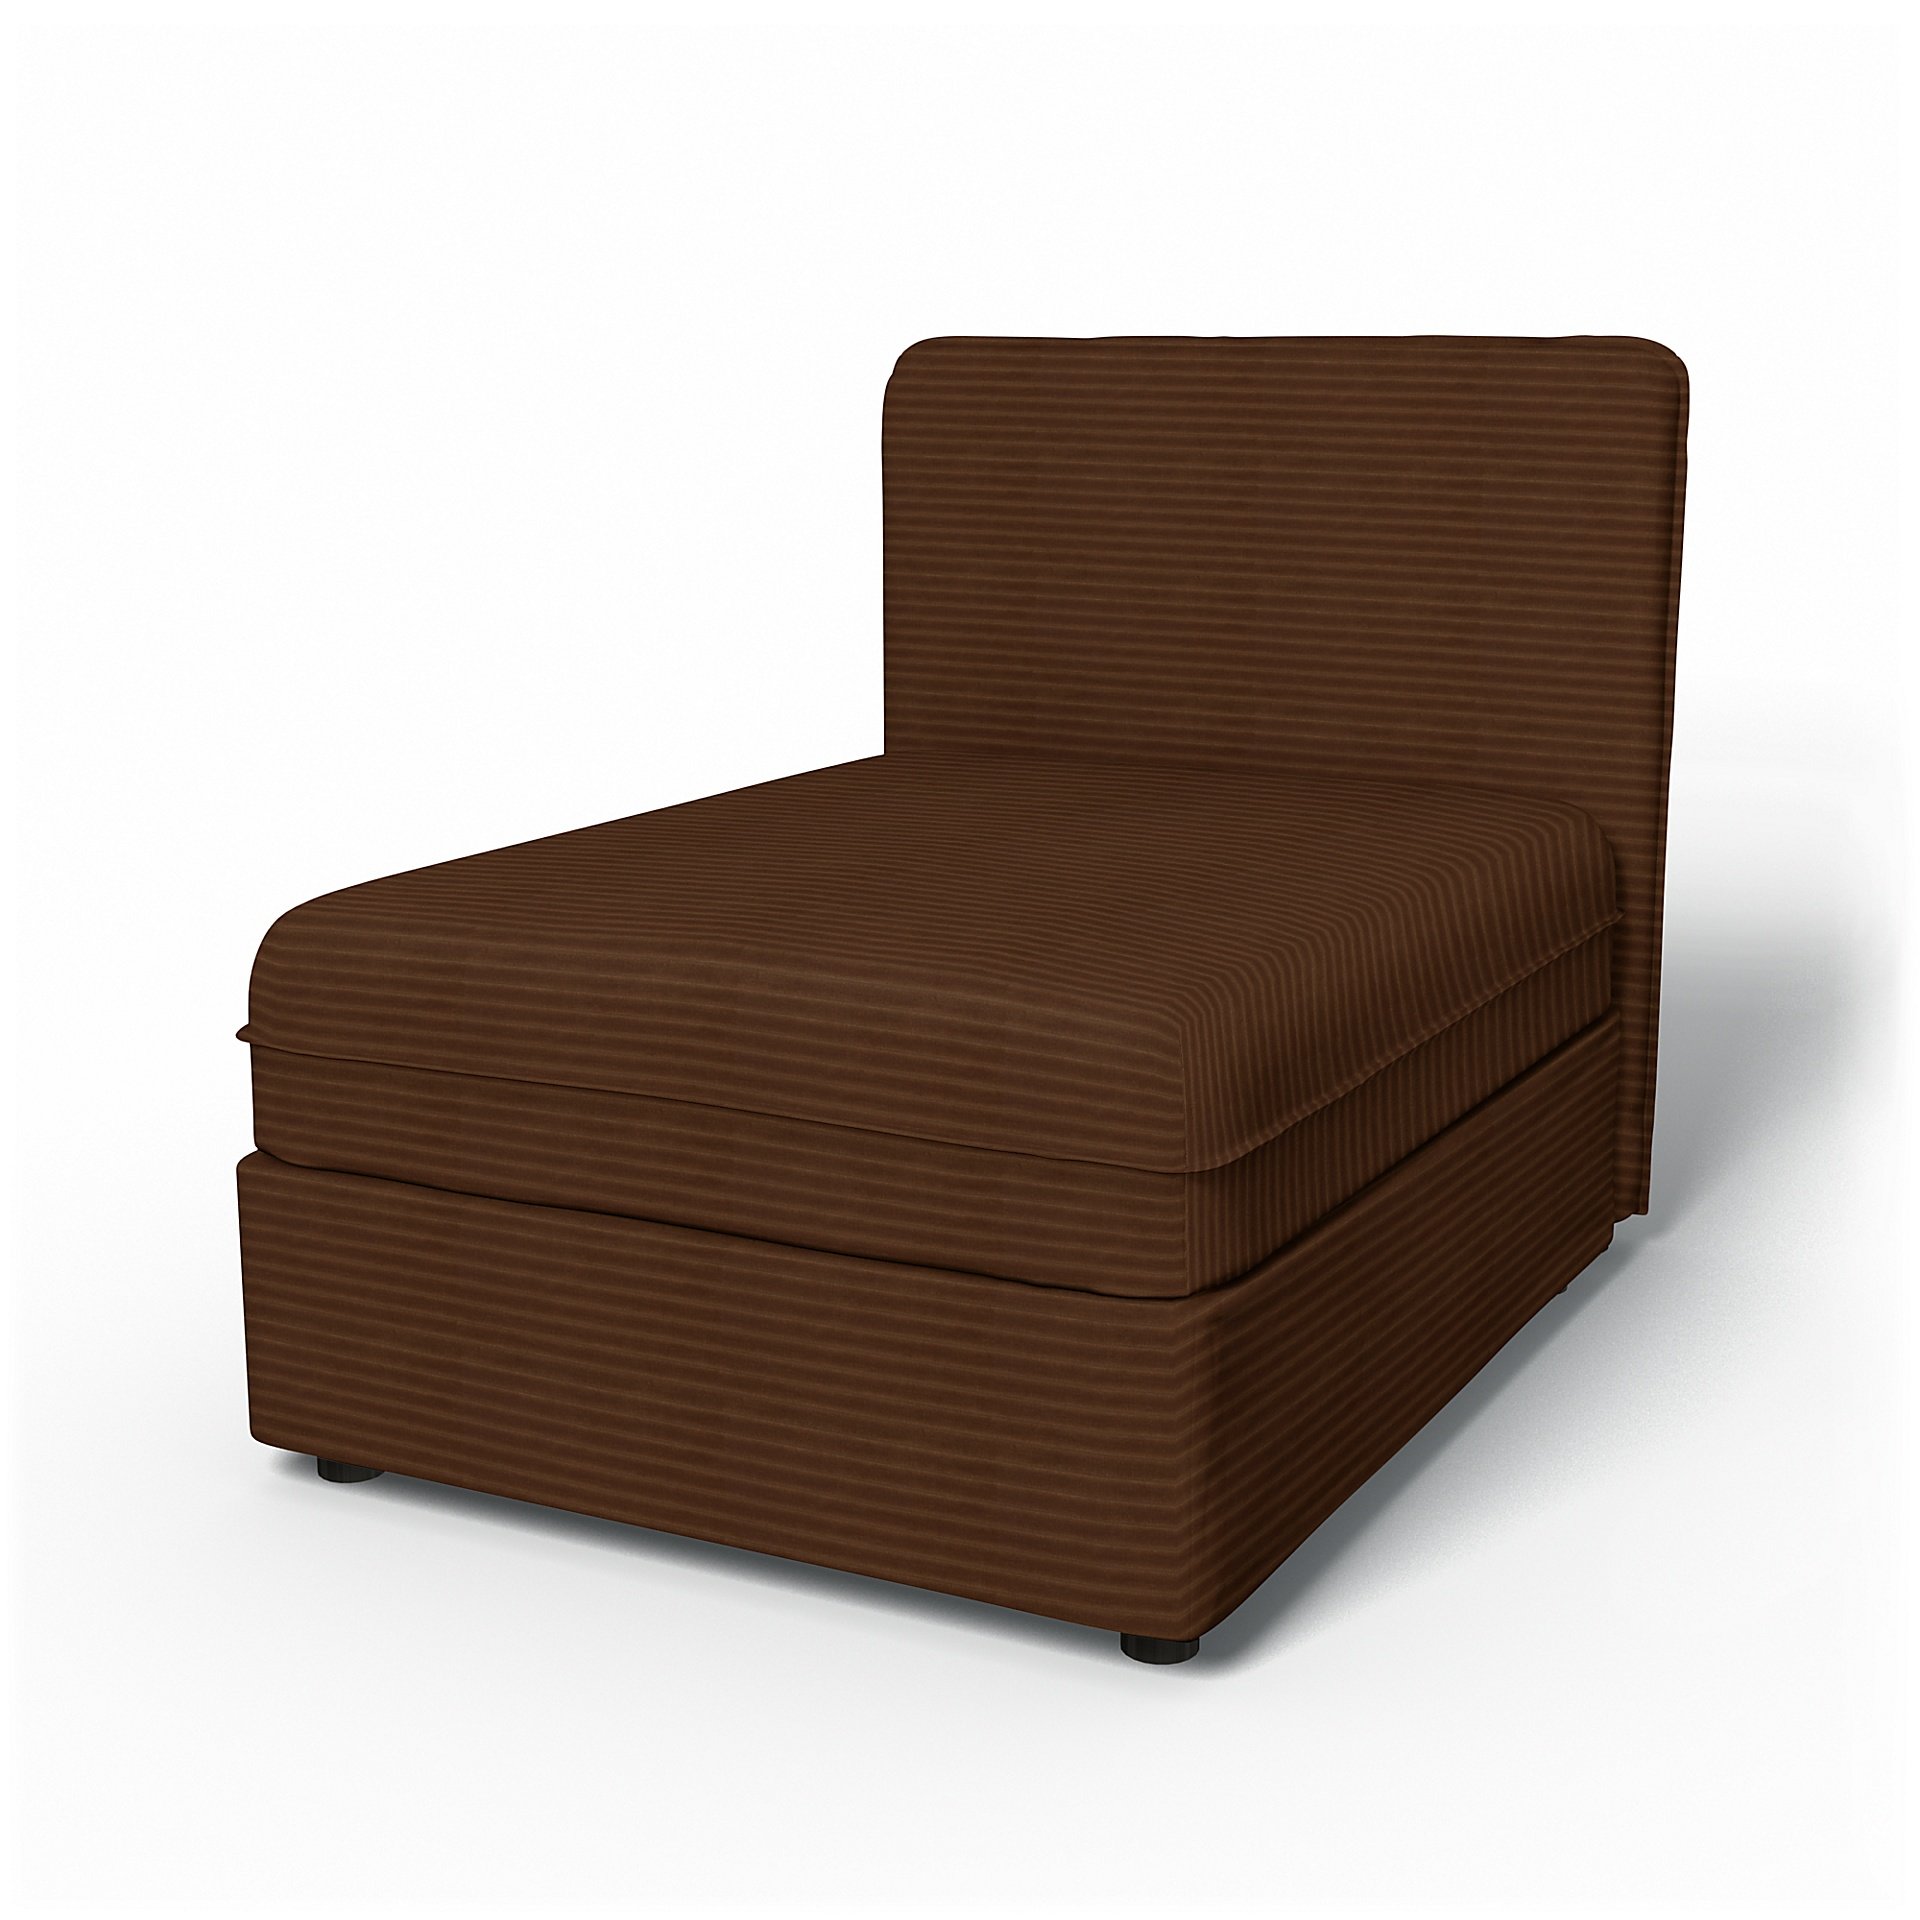 IKEA - Vallentuna Seat Module with Low Back Cover 80x100cm 32x39in, Chocolate Brown, Corduroy - Bemz